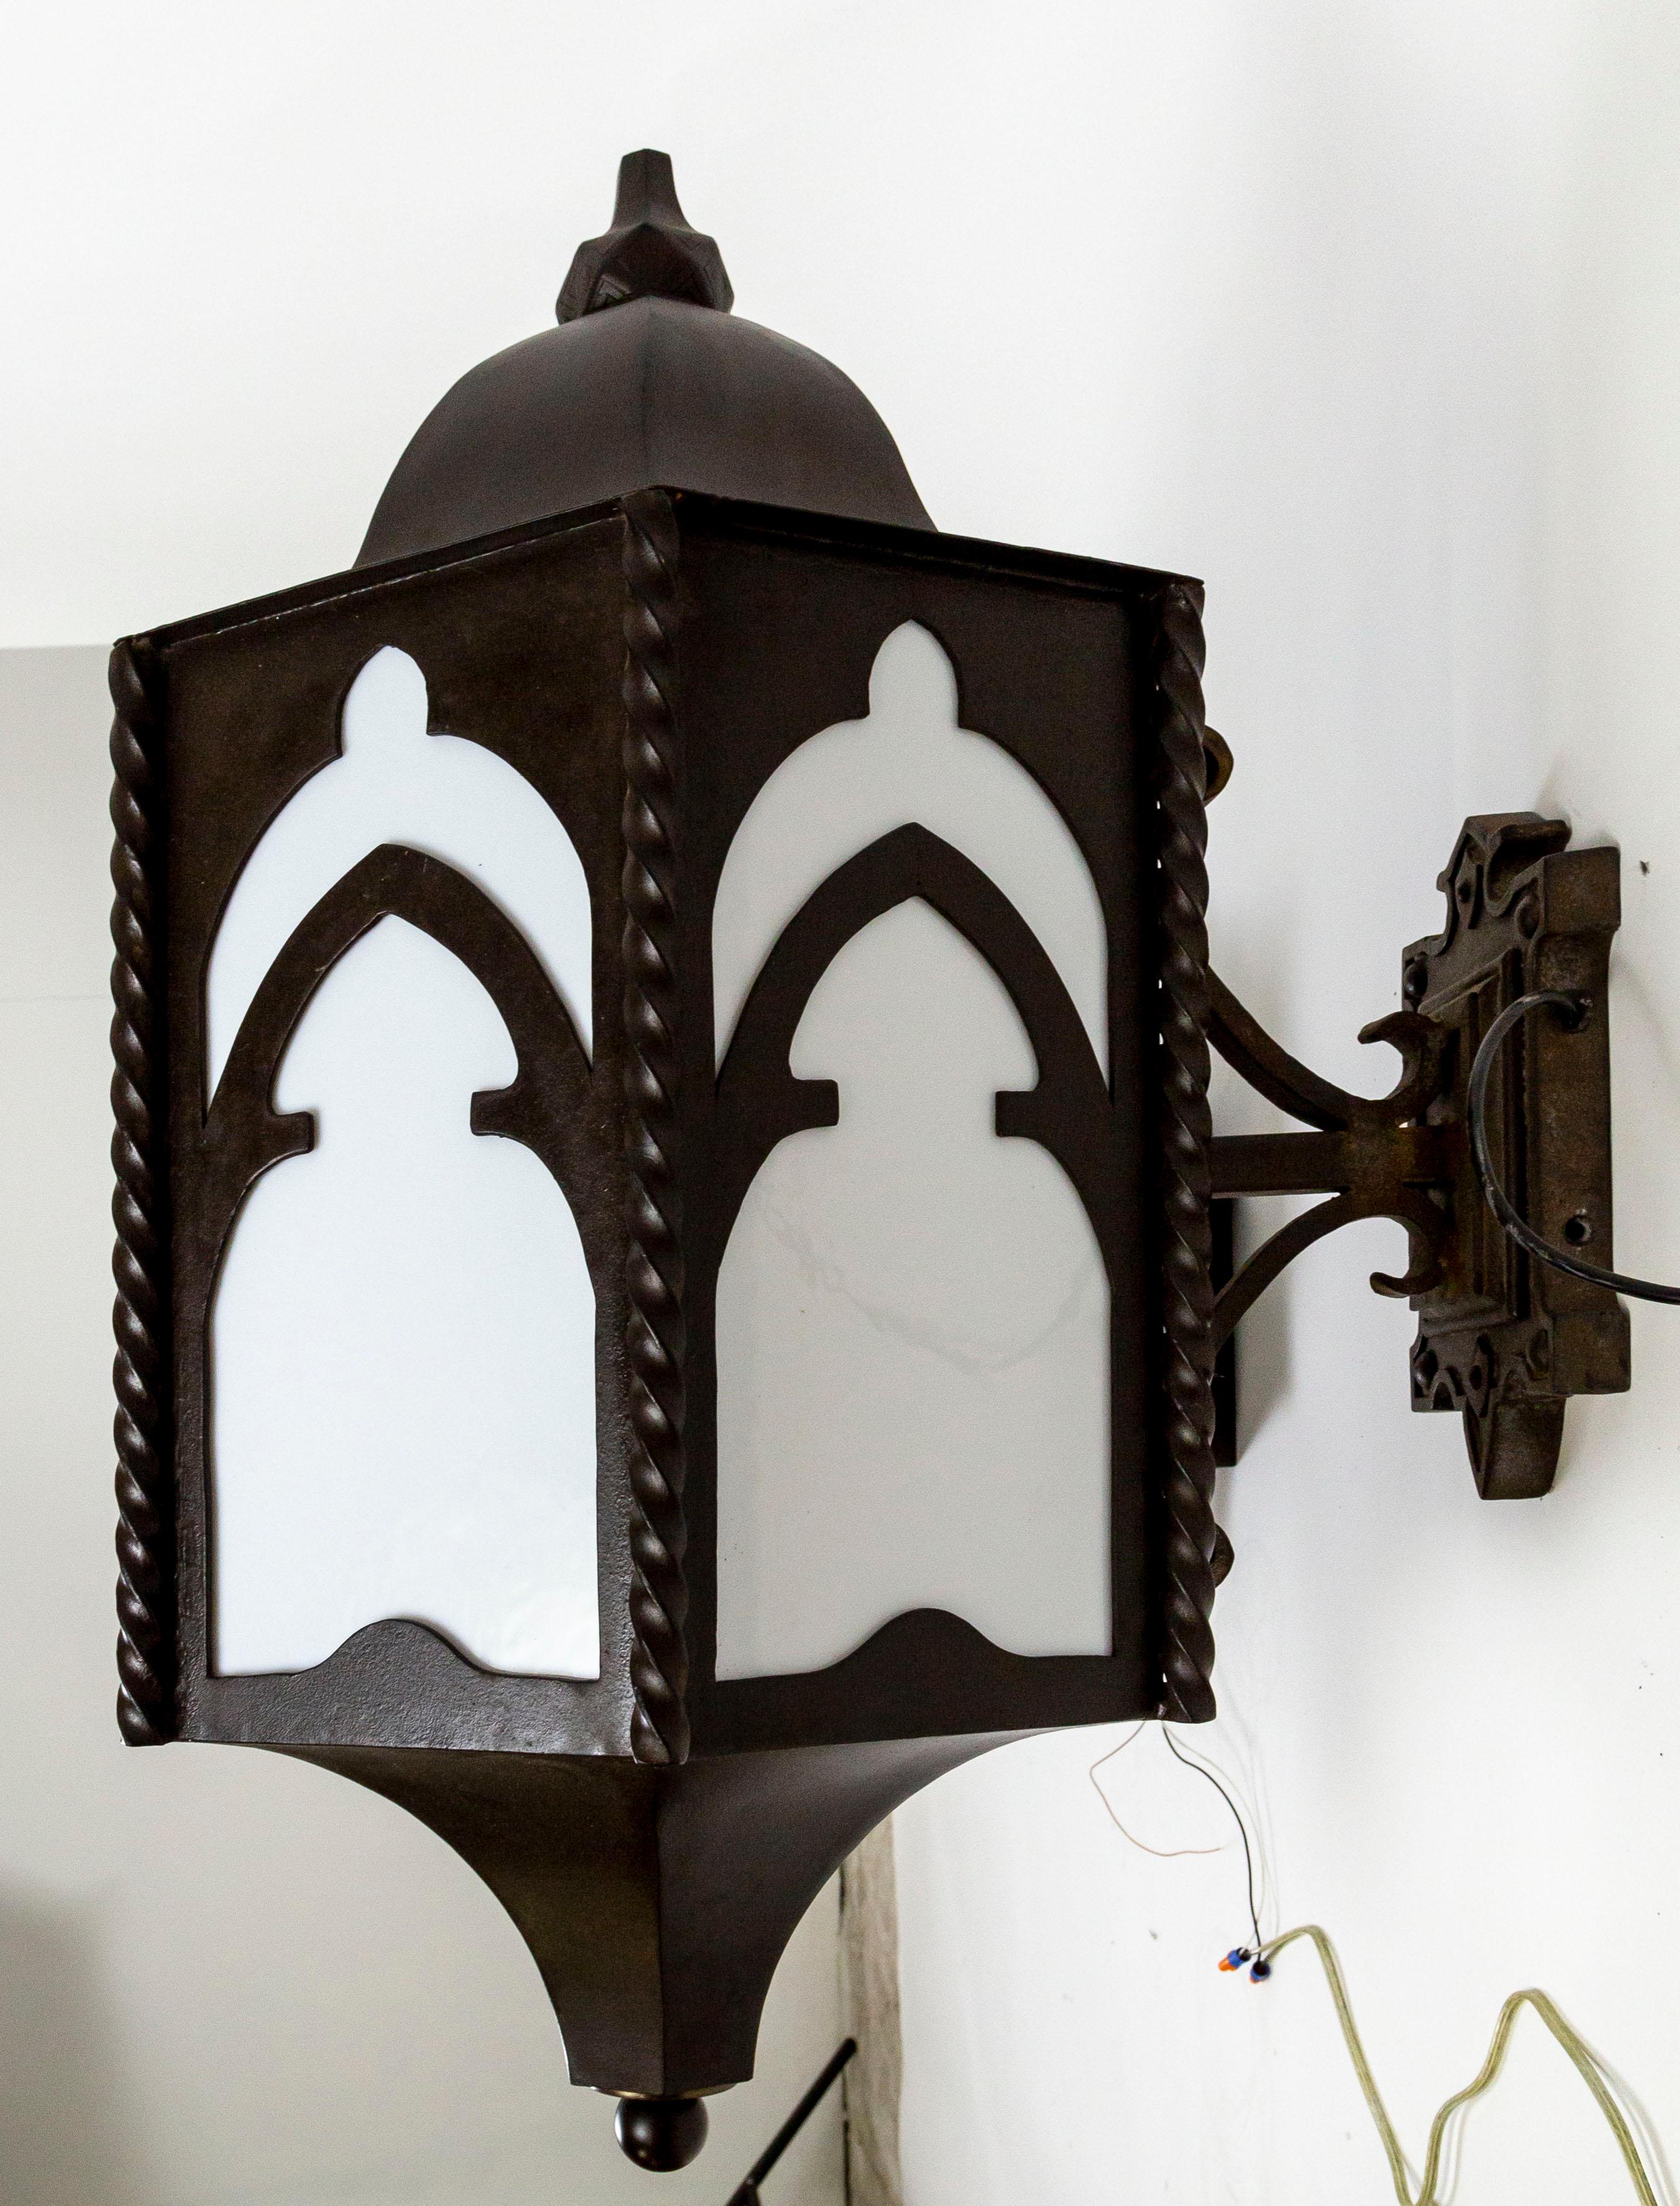 A pair of gigantic, iron wall lanterns in a dome-capped, hexagon shape, with gothic arched panels and twisted column accents. They have newly installed, white glass plates and one medium base socket. Measures: 25.25